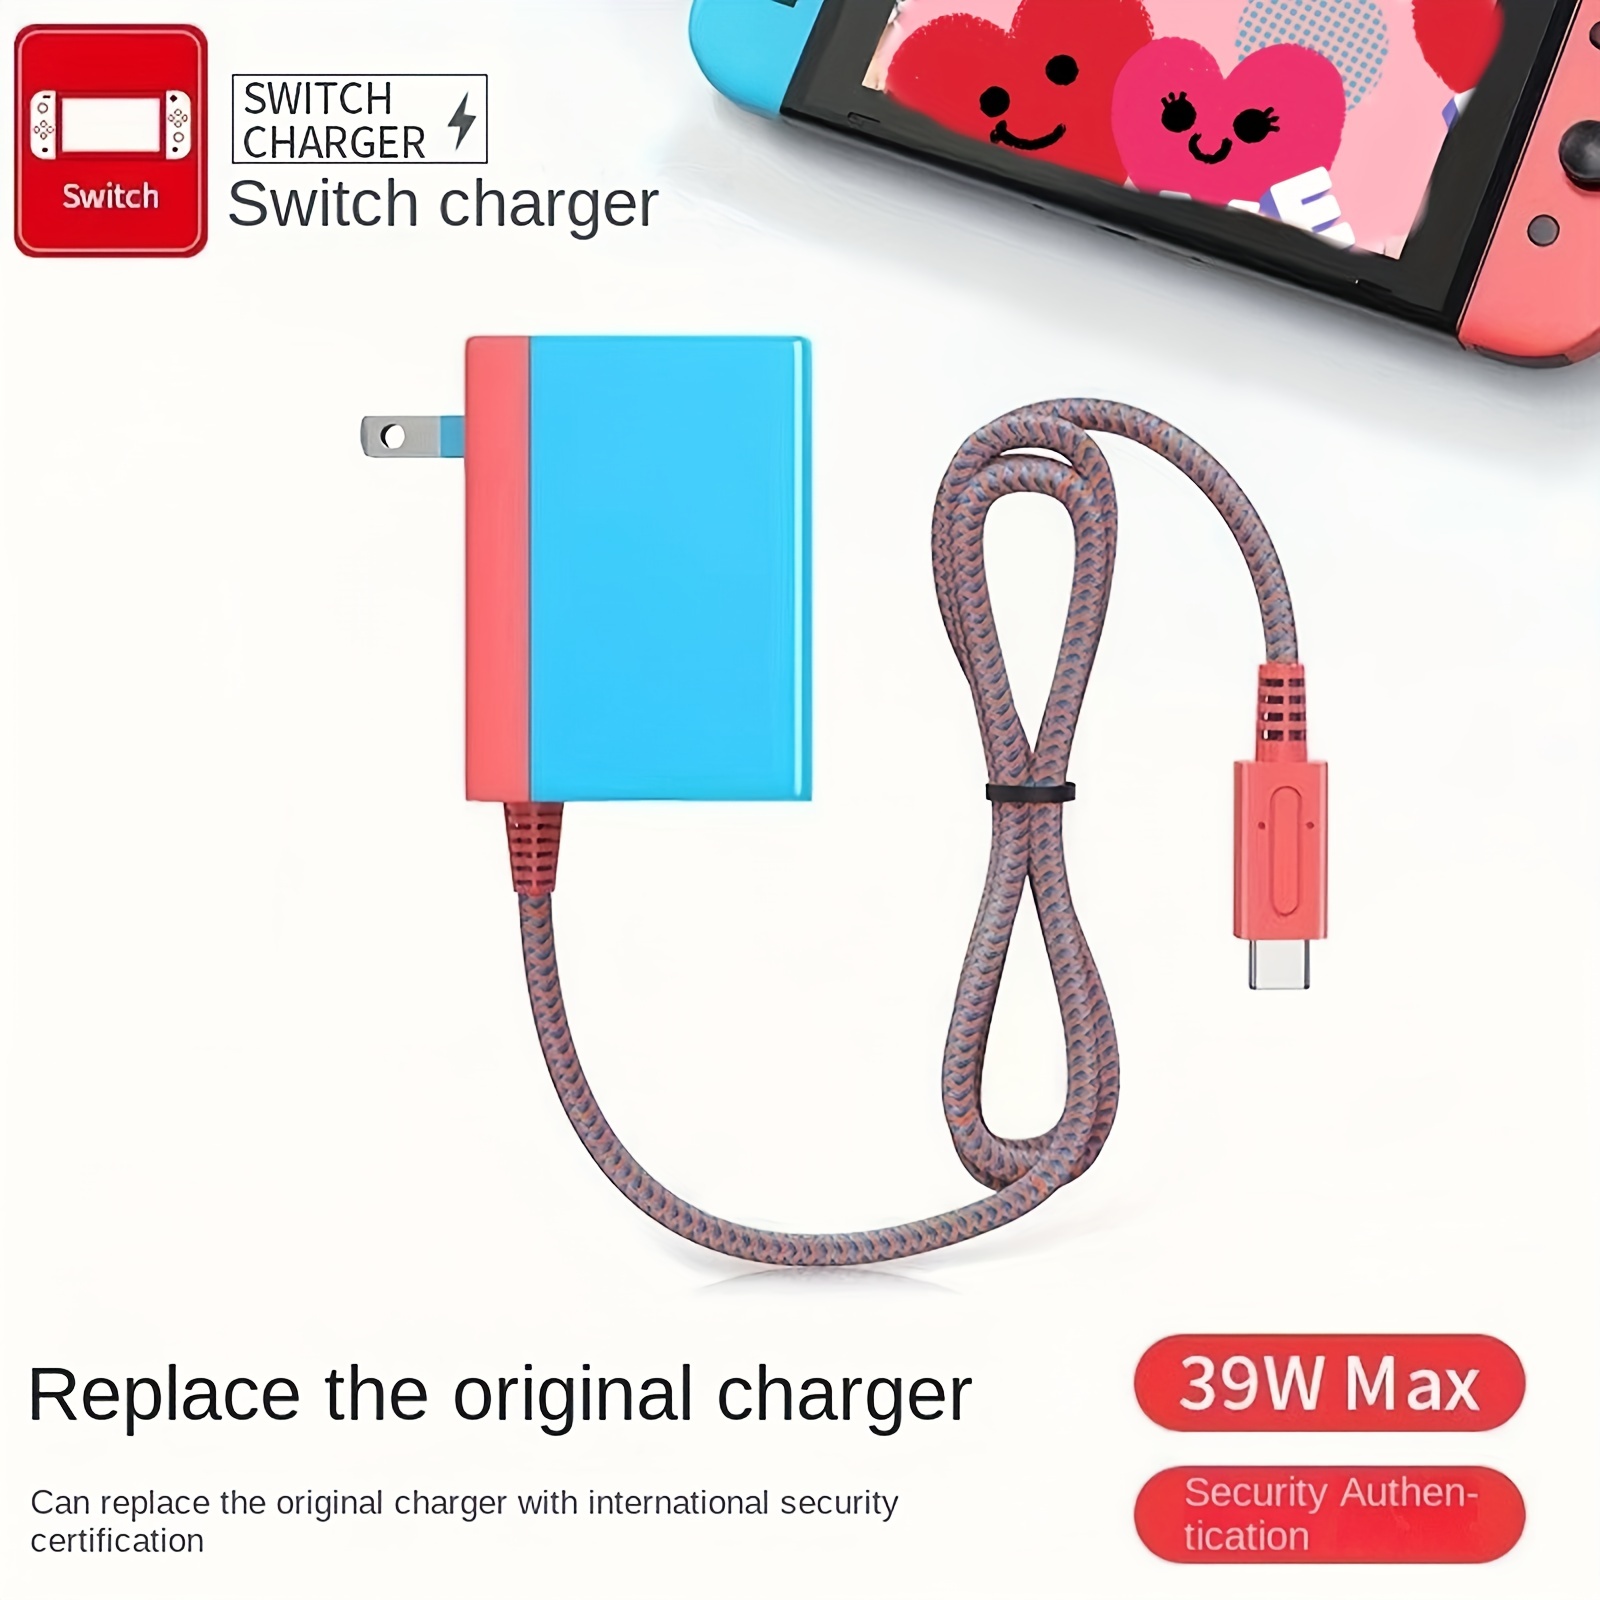 Charger for Nintendo Switch, Switch Charger AC Adapter Power